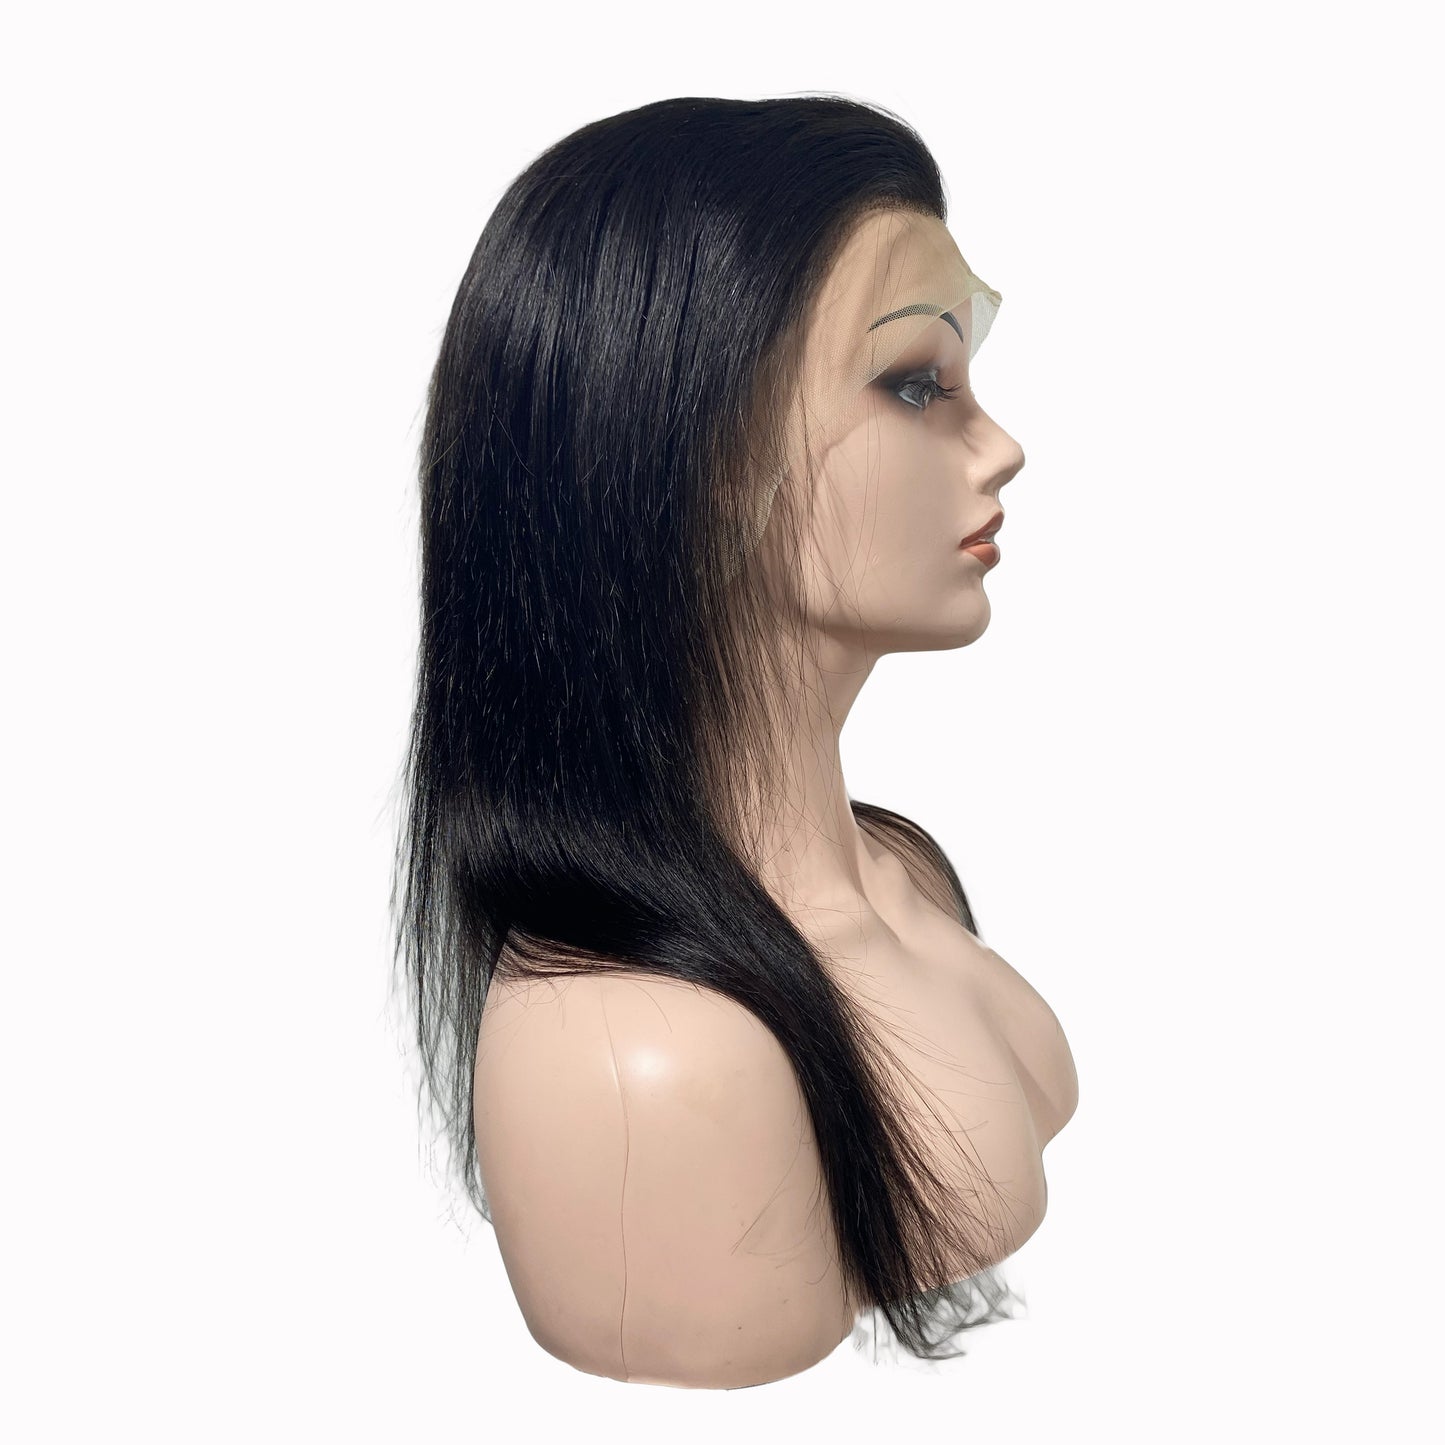 22" Straight Human Hair Frontal Lace Wig - 1# Black - 13A Grade | side